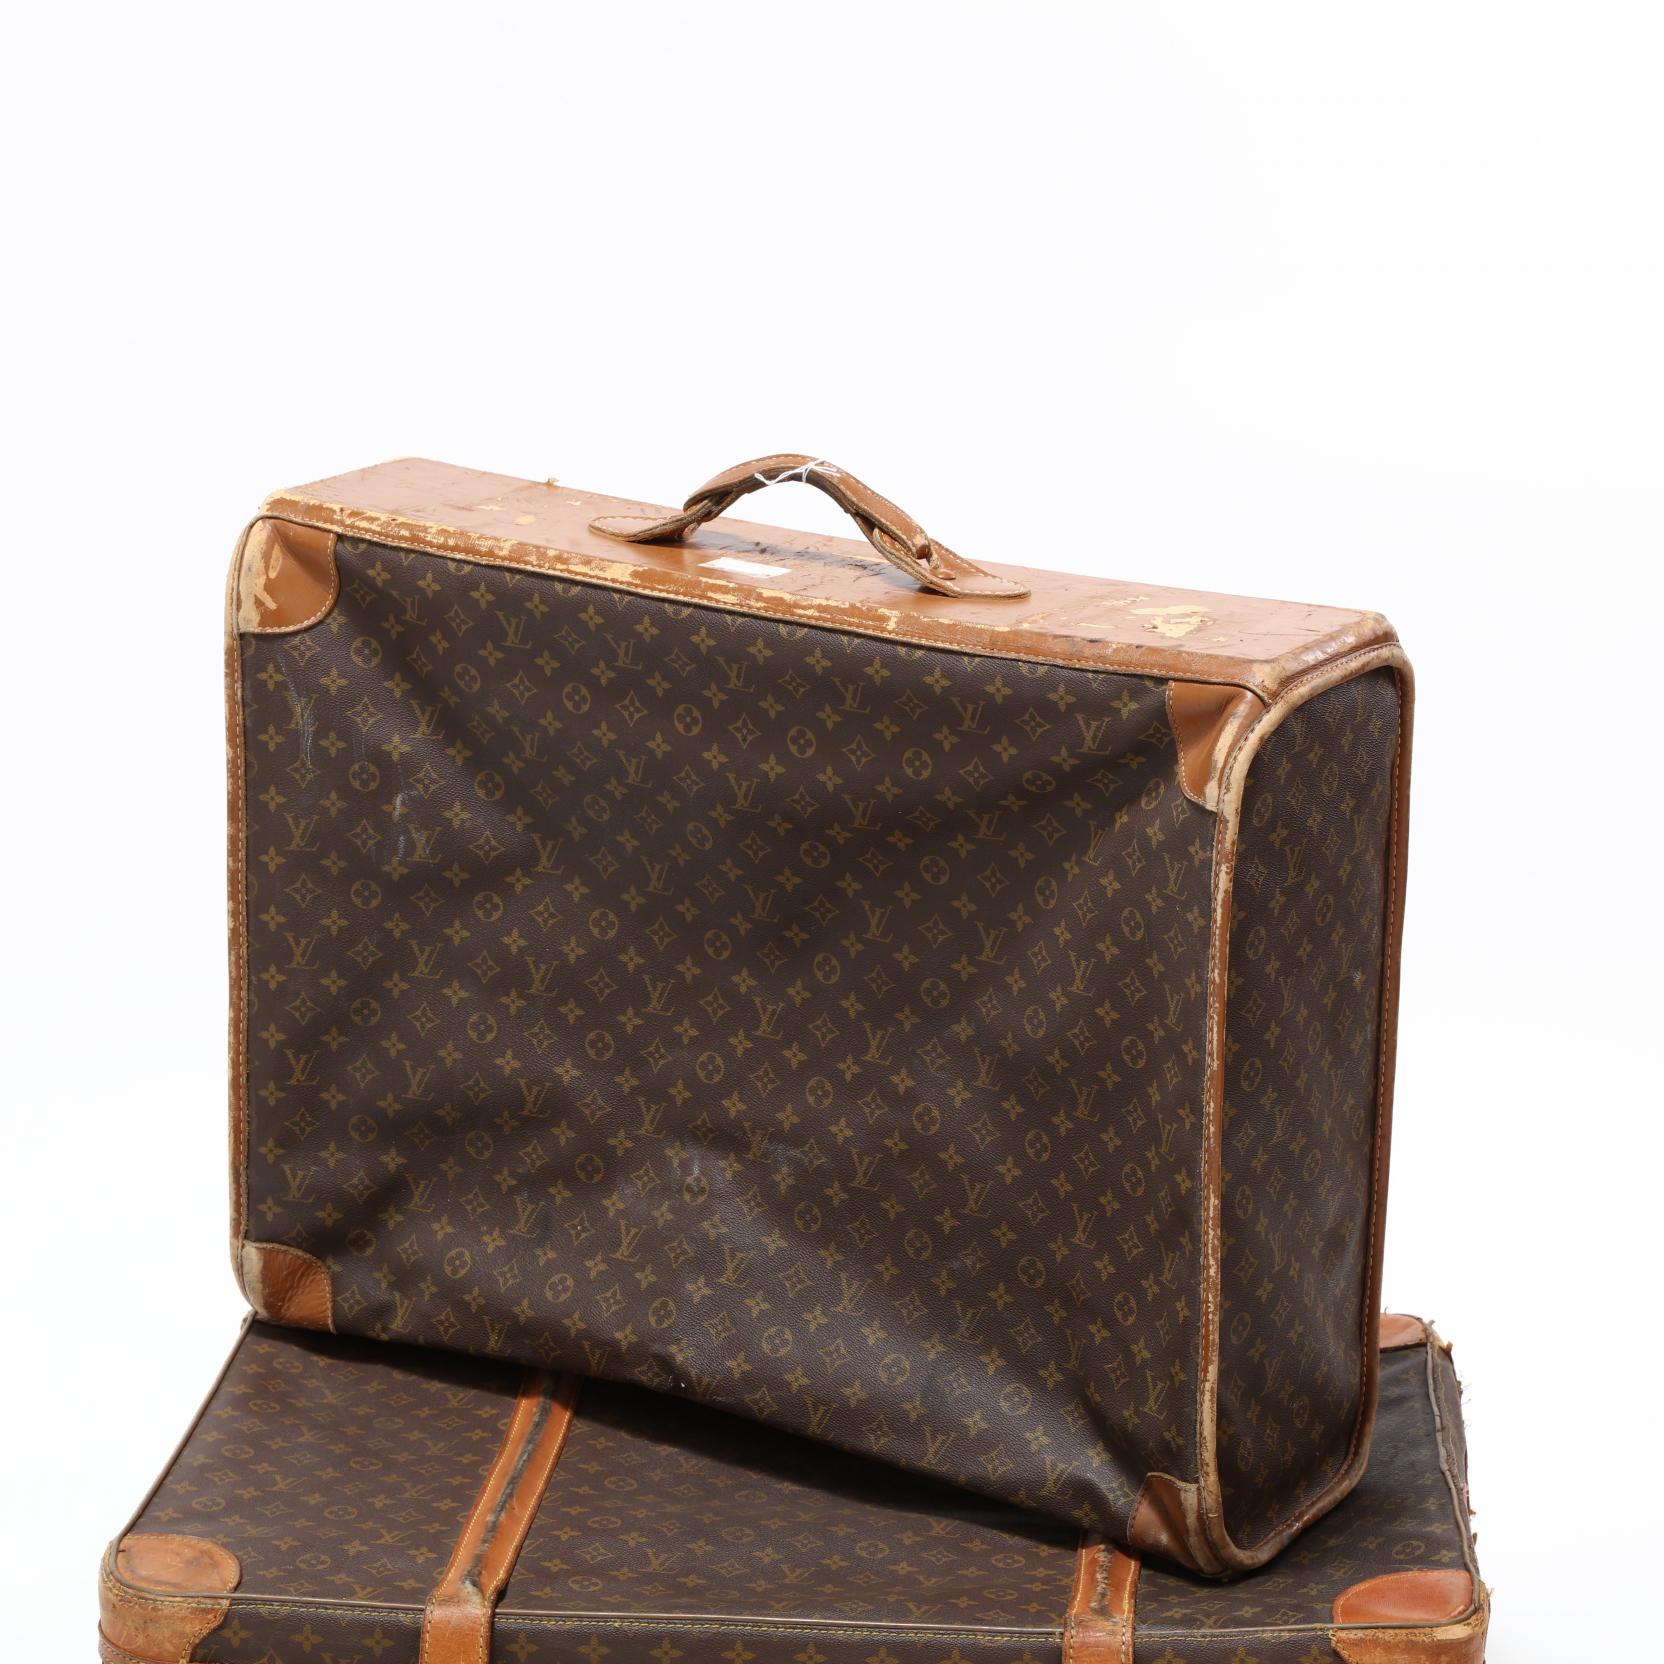 Sold at Auction: Louis Vuitton Vintage Soft Sided Travel Bag